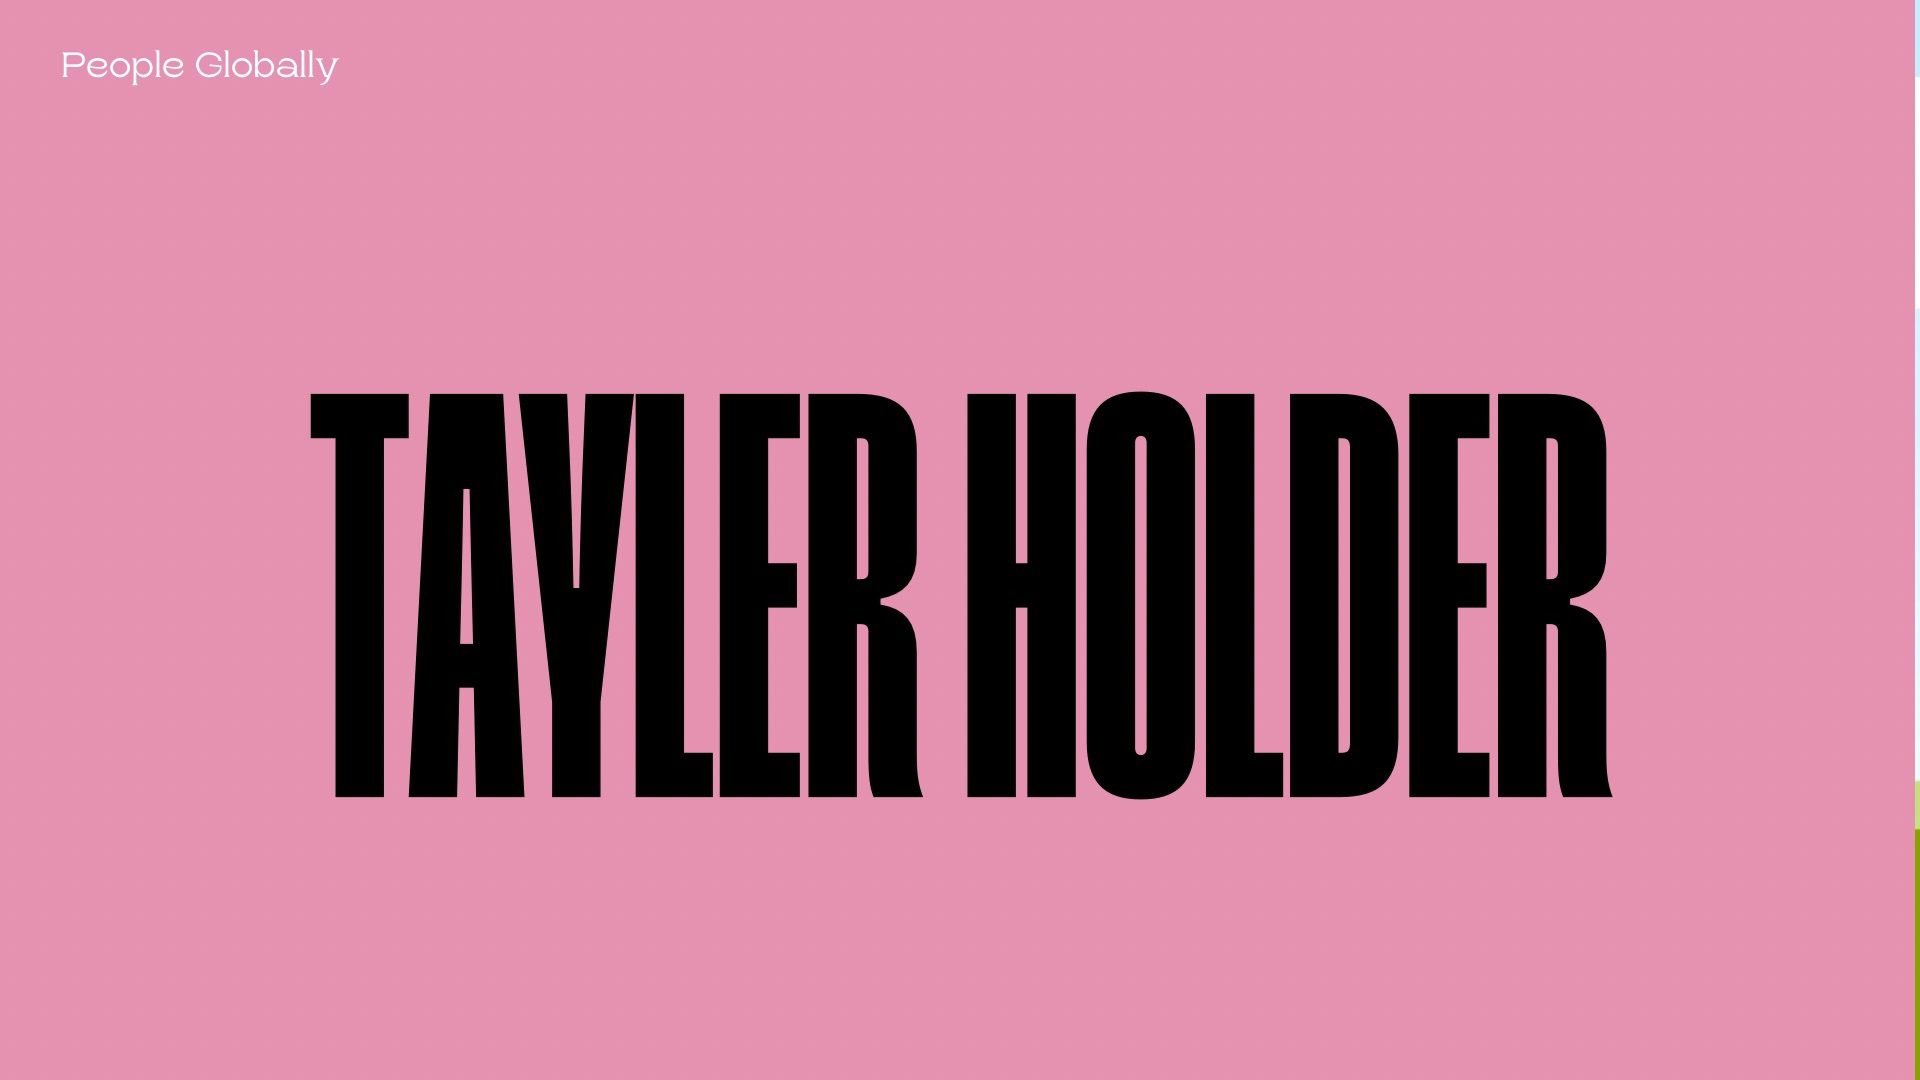 How many monthly Spotify listeners does Tayler Holder have?